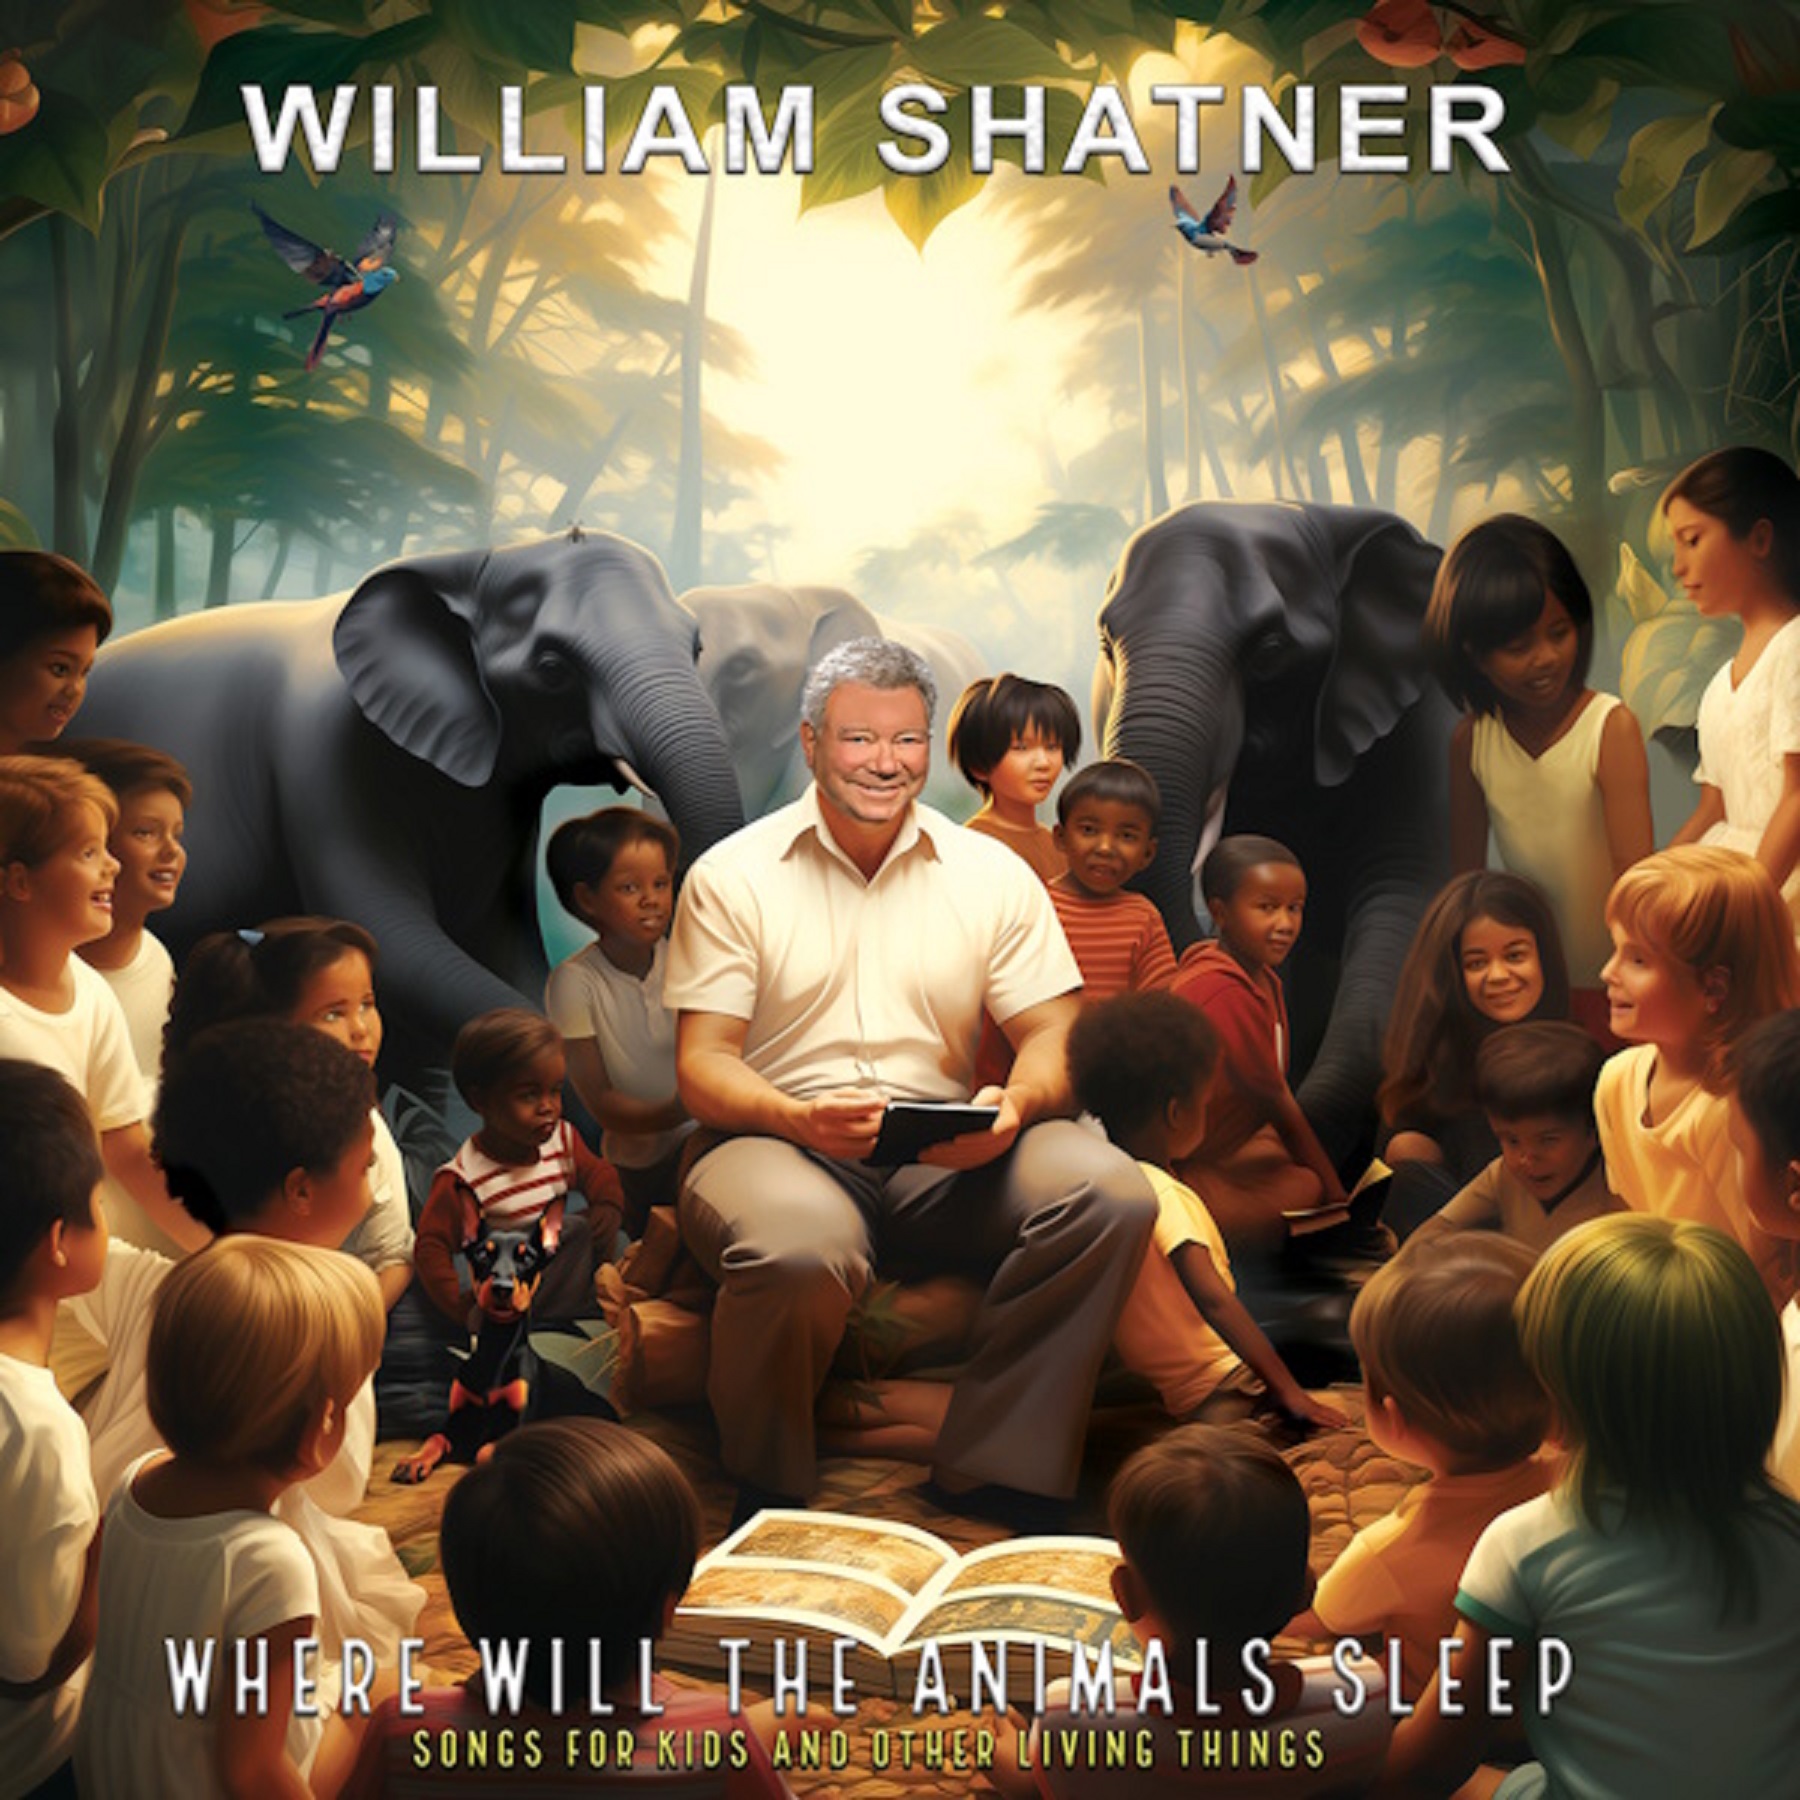 Beloved Hollywood Icon WILLIAM SHATNER Unveils New Single & Lyric Video From His First Ever Children’s Album 'Where Will The Animals Sleep? - Songs For Kids And Other Living Things'!